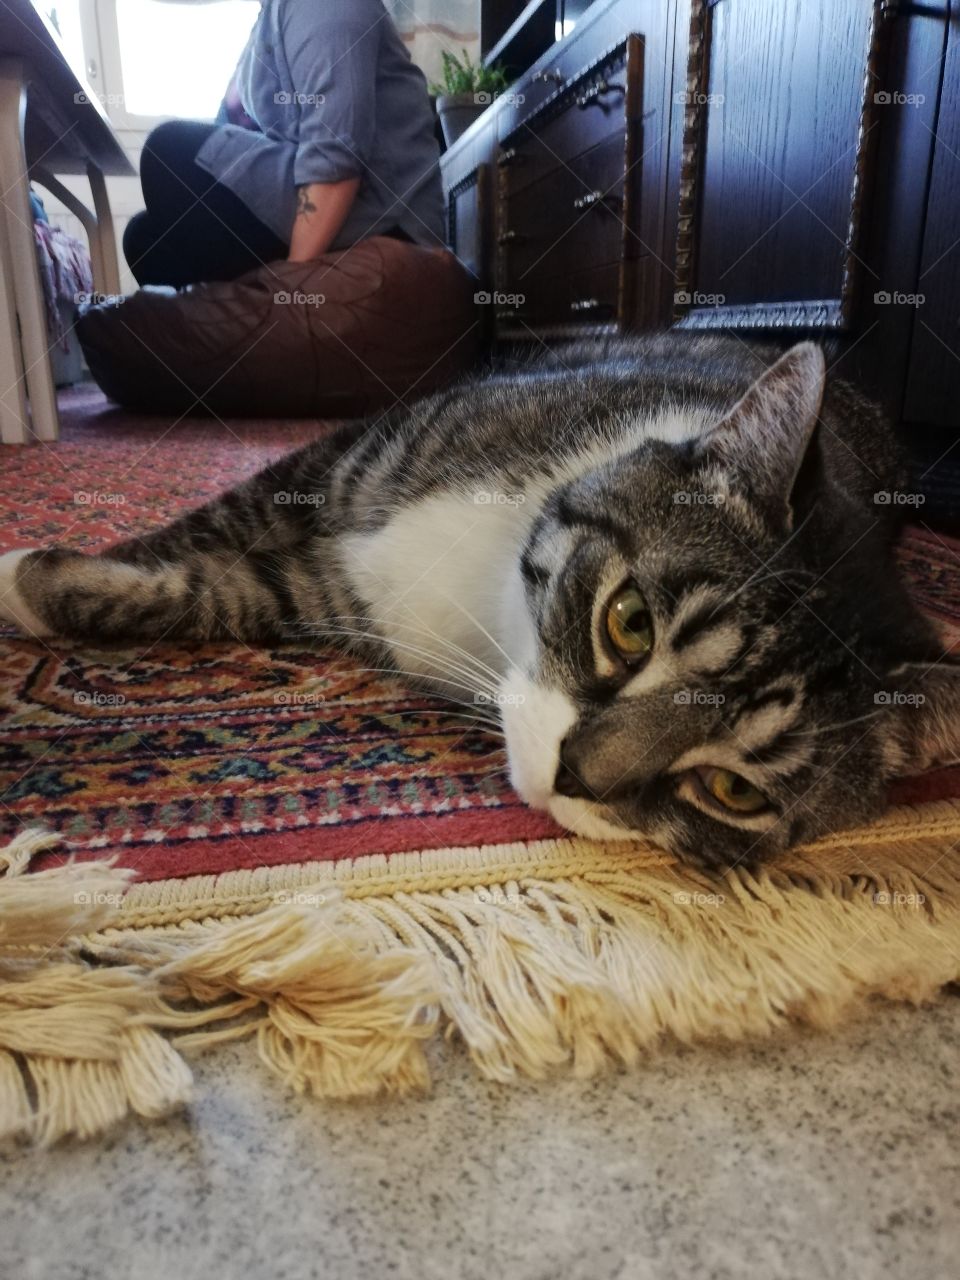 A multicolored cat is resting on a patterned carpet. A person is sitting in the background on a brown leather pillow.